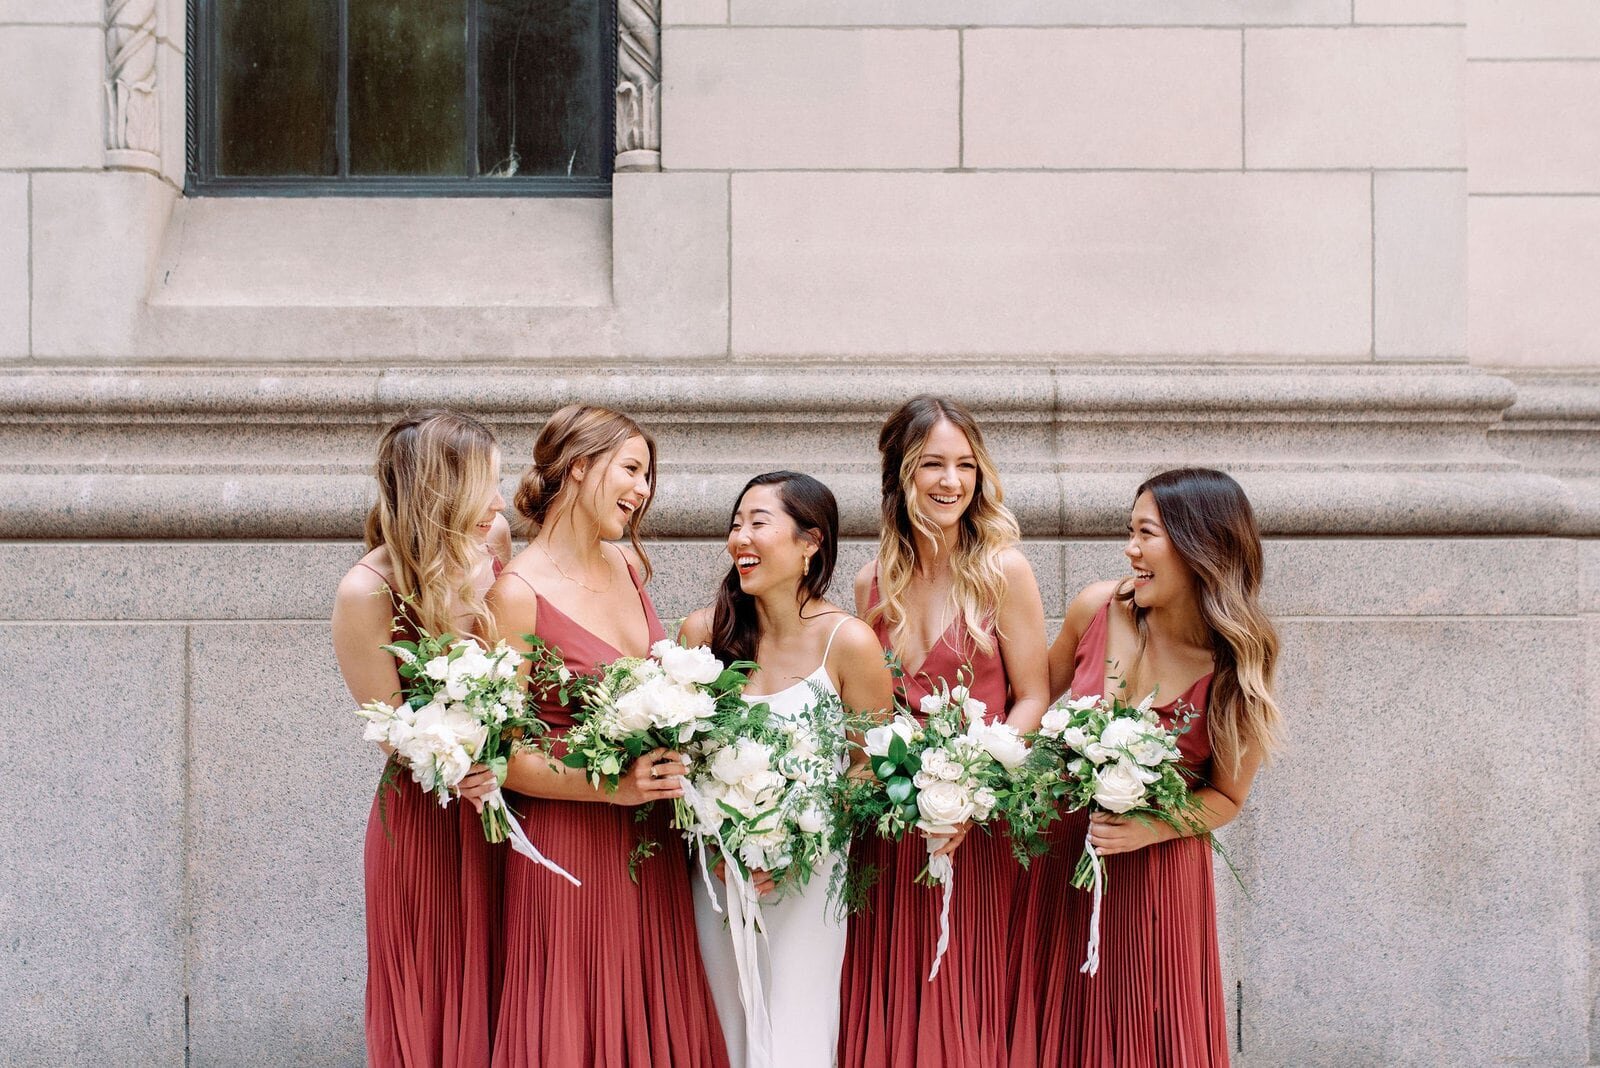 Modern Bride with bridesmaids crimson red dresses by Aritzia editorial wedding at hotel ocho toronto jacqueline james photography